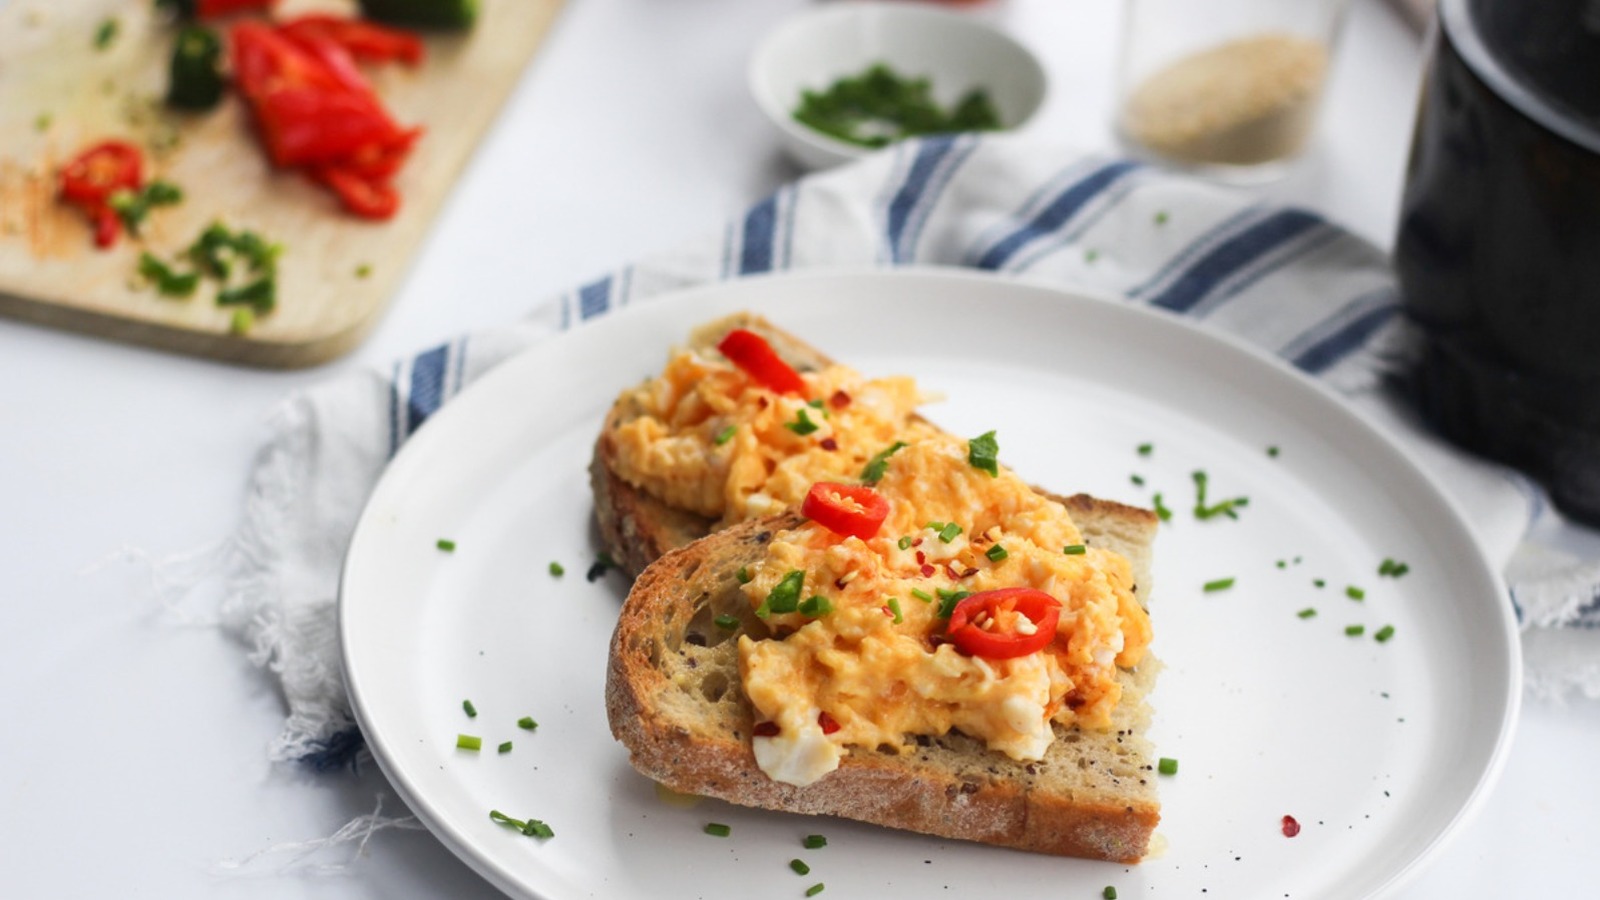 What Are Good Spices For Scrambled Eggs?